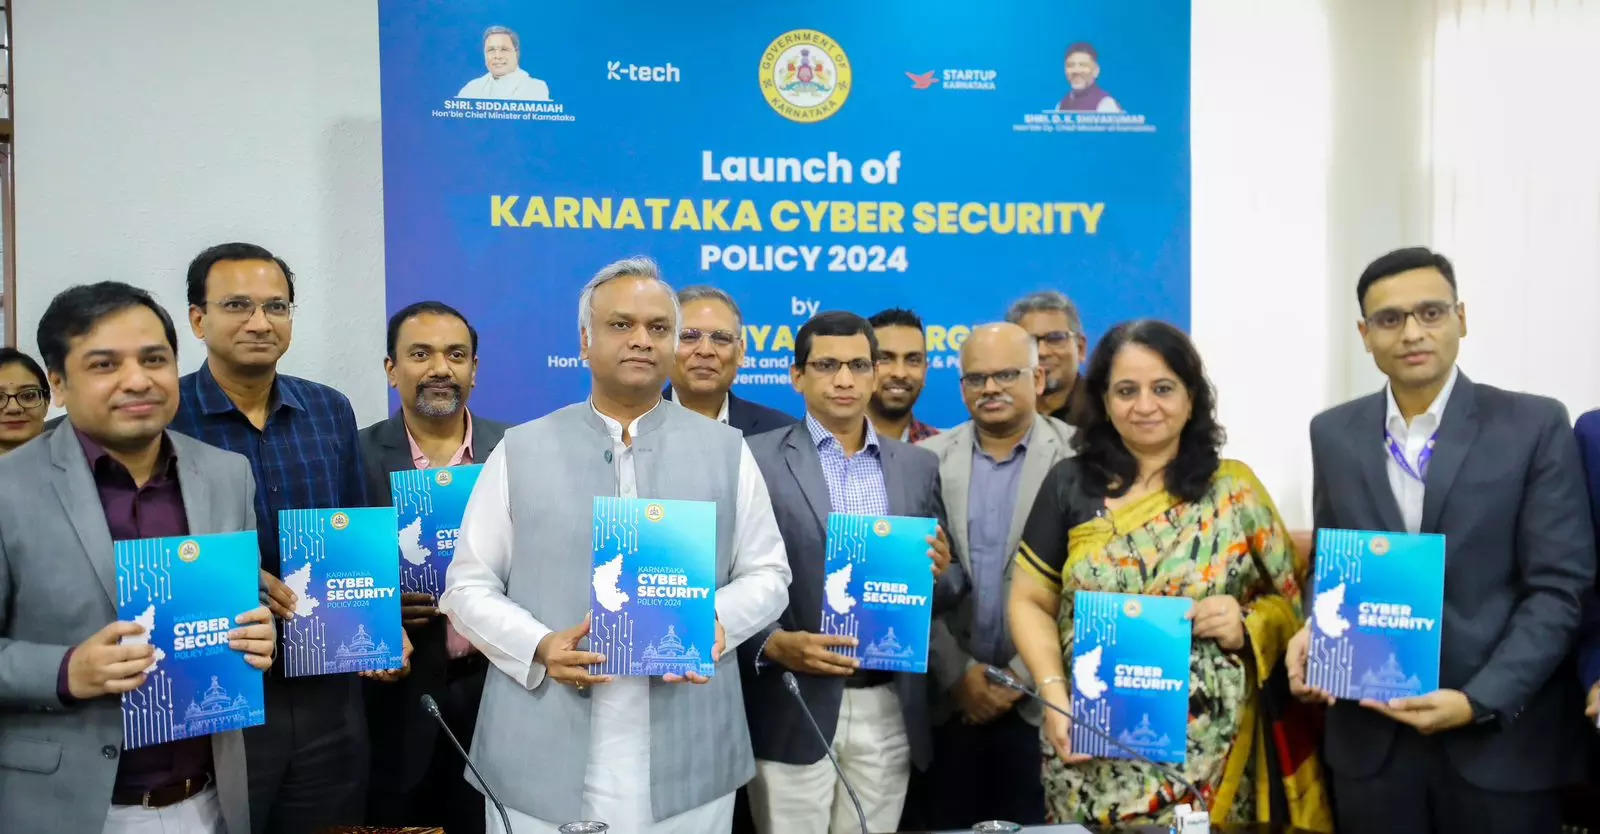 Karnataka launches cybersecurity policy to combat rising levels of cybercrimes in the state 